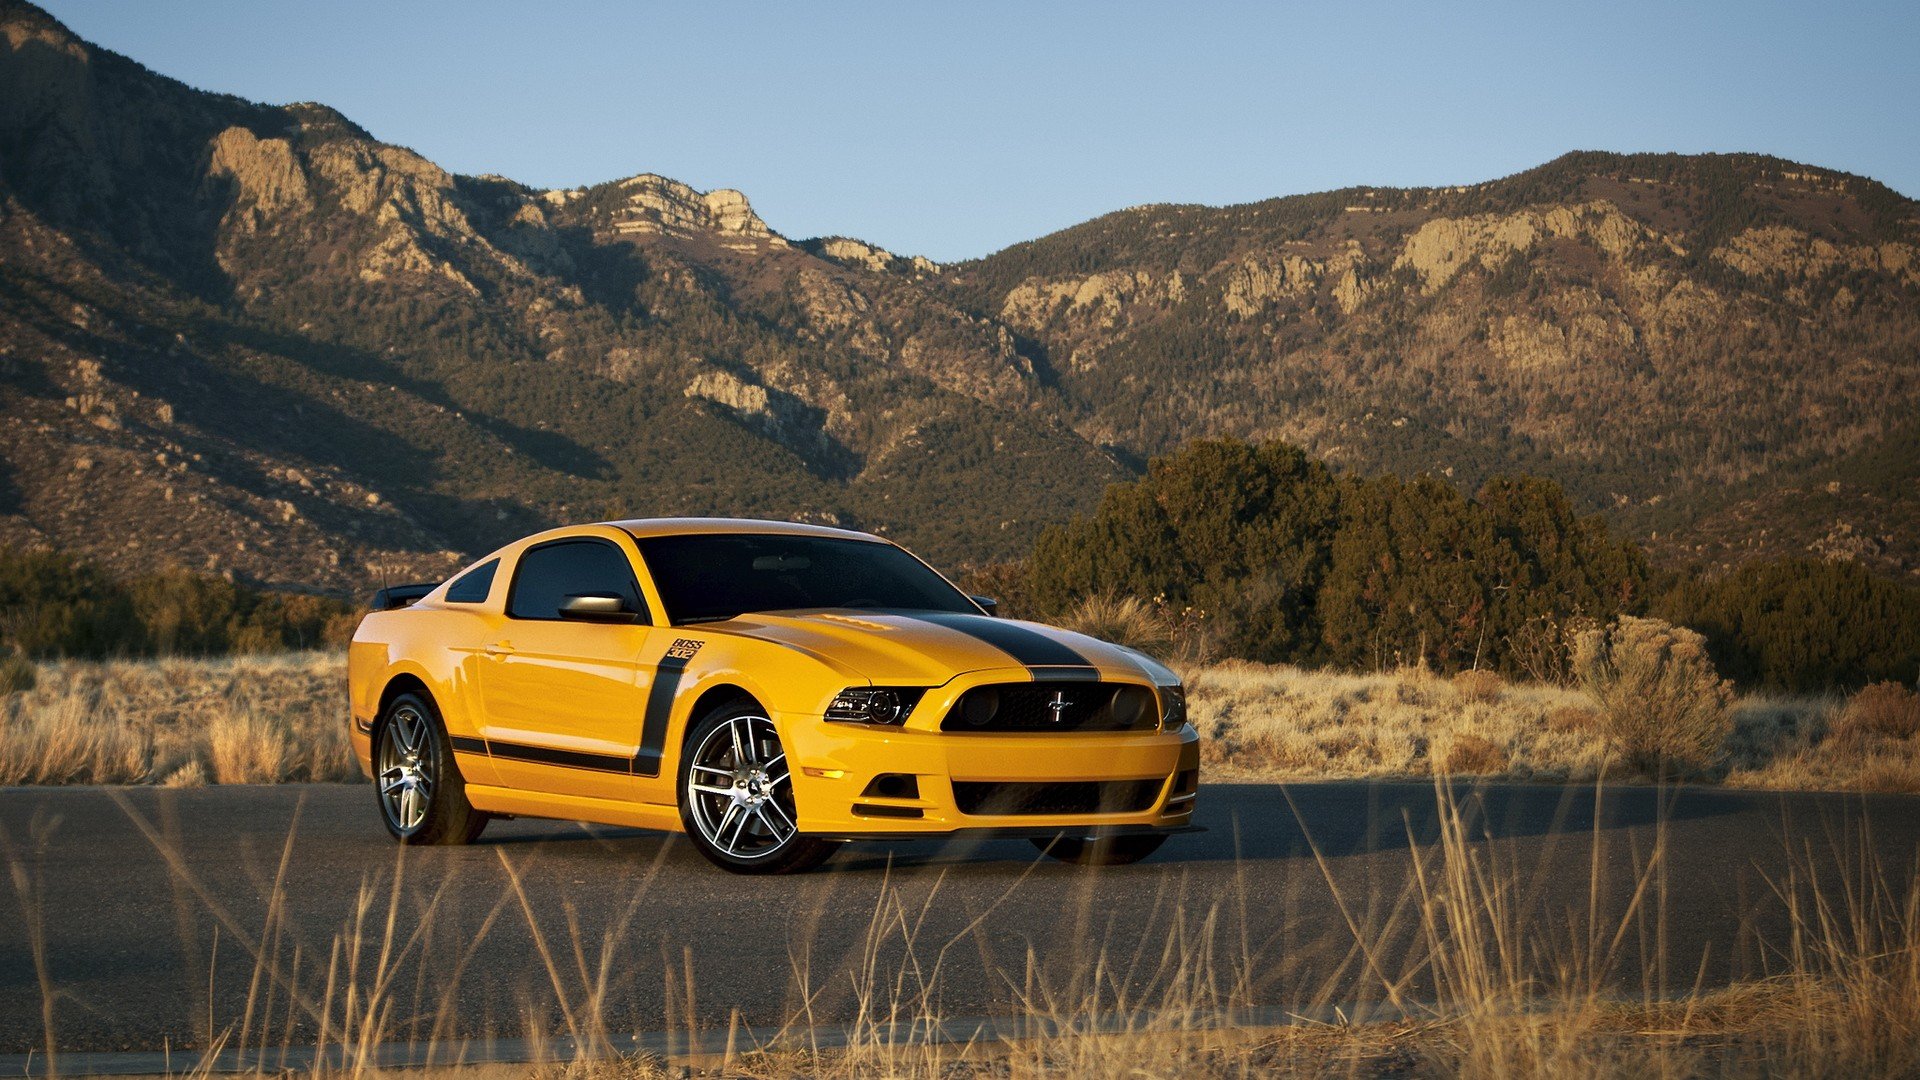 mountains, Nature, Cars, Ford, Mustang, Stripes, Yellow, Cars, Muscle, Car, Boss, 3, 02mustang, Boss Wallpaper